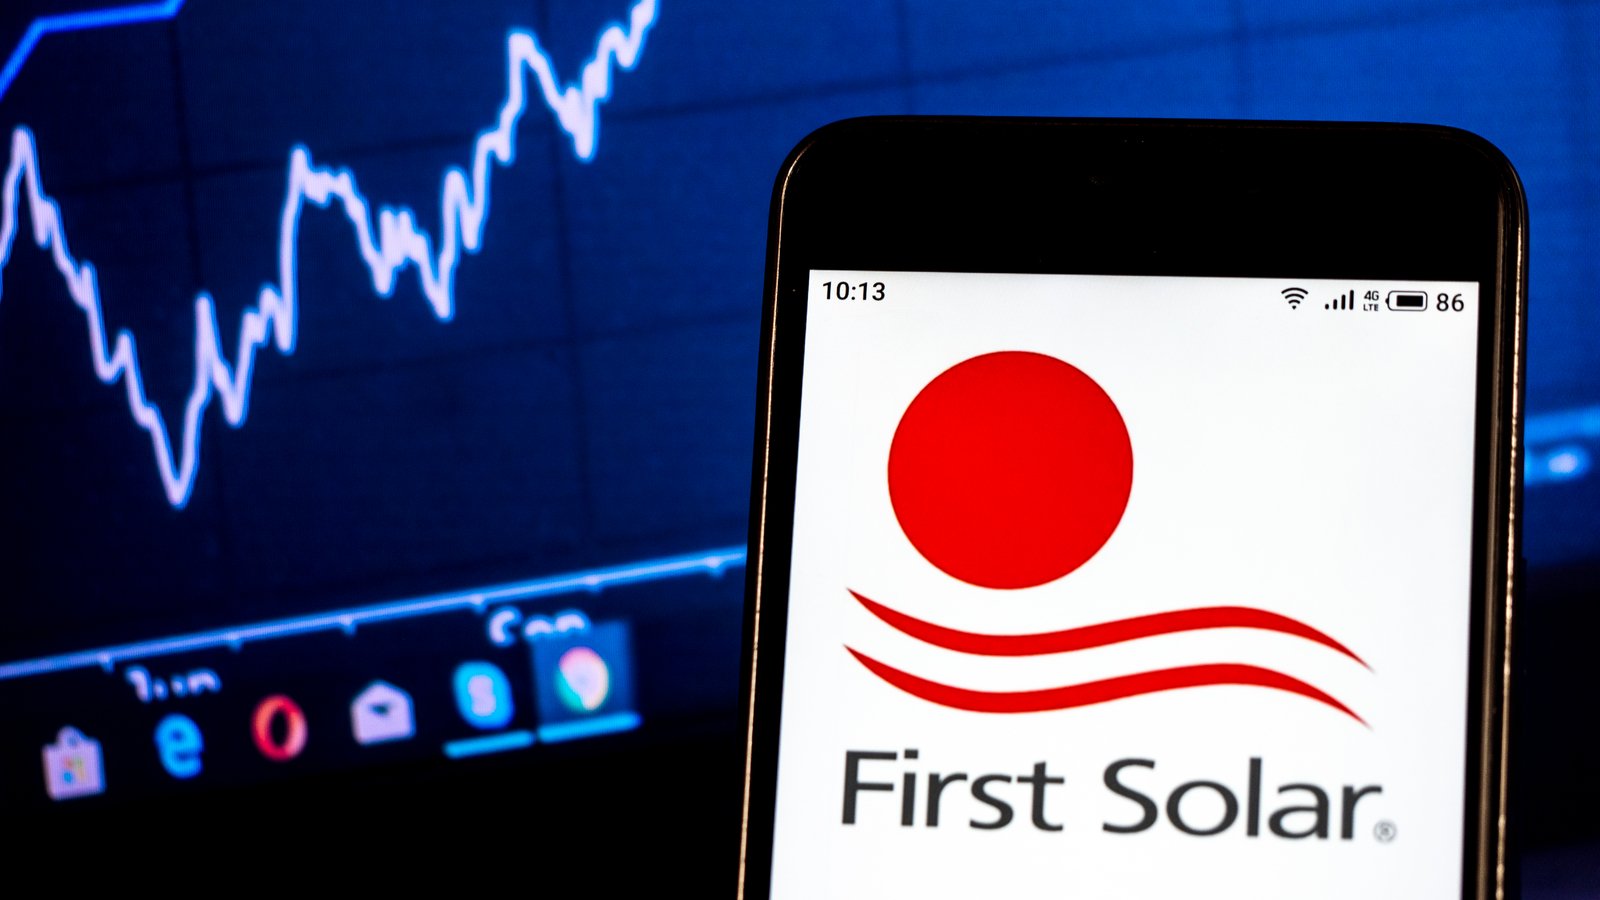 First Solar (FSLR) logo on smartphone in front of computer screen with graphs